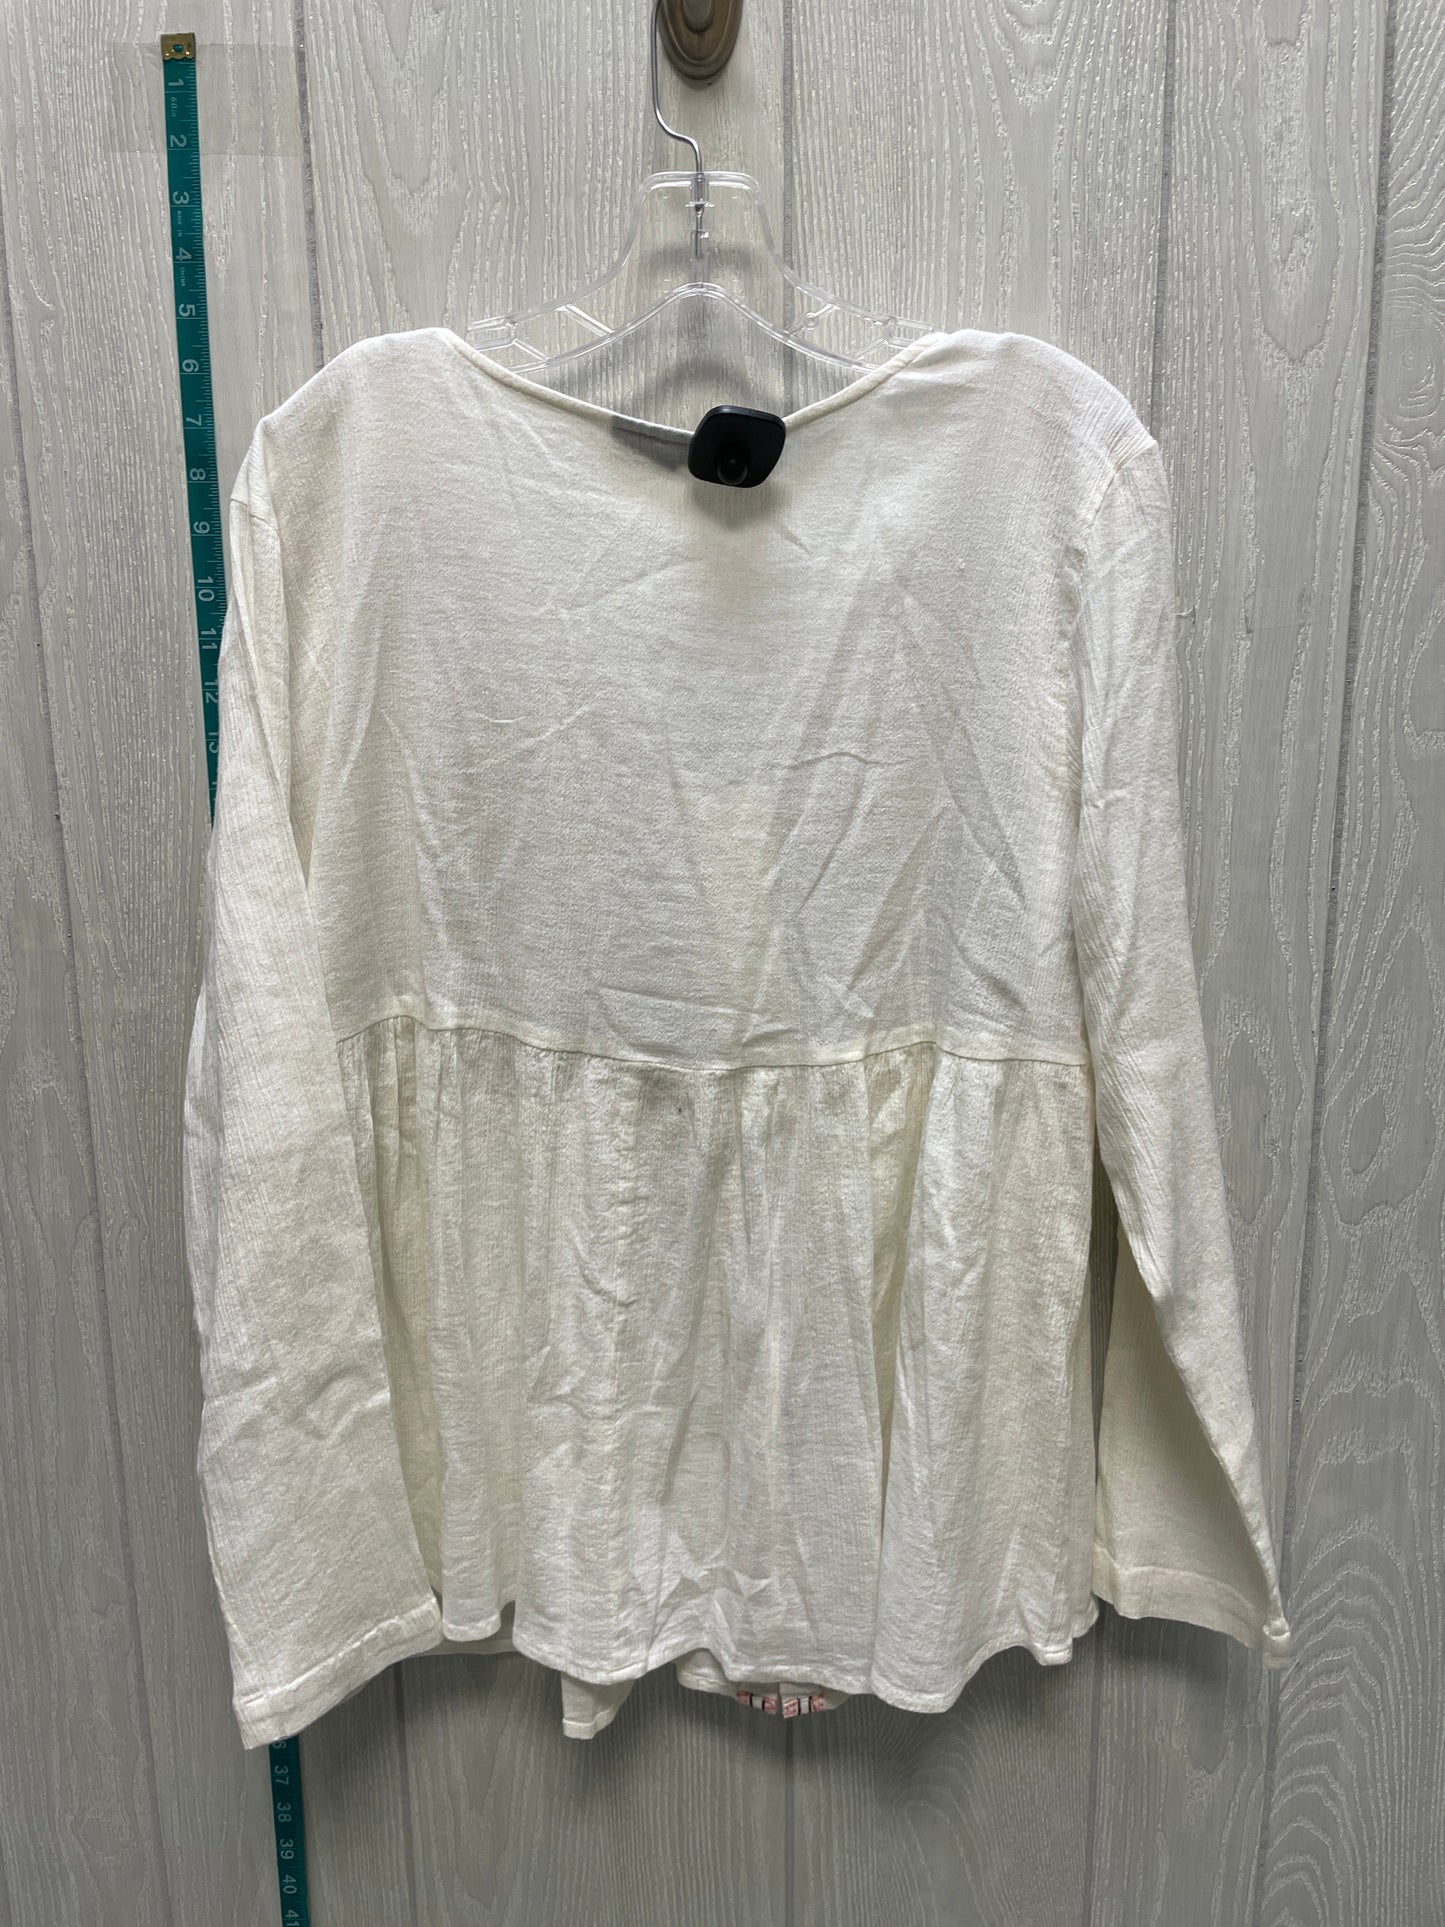 Cream Top Long Sleeve Pyramid Collection, Size L